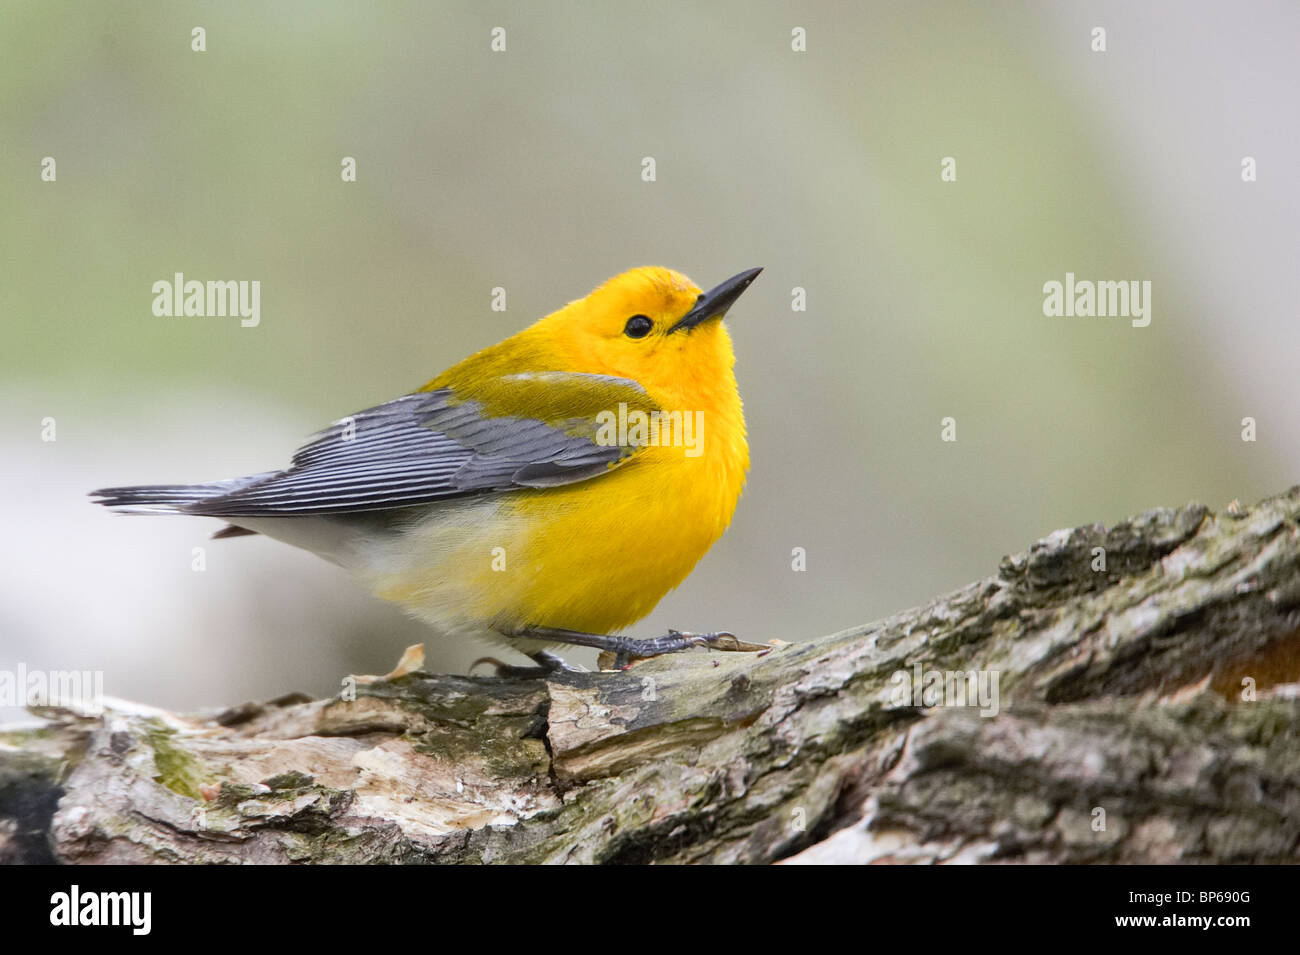 Adult Male Prothonotary Warbler Perched Stock Photo